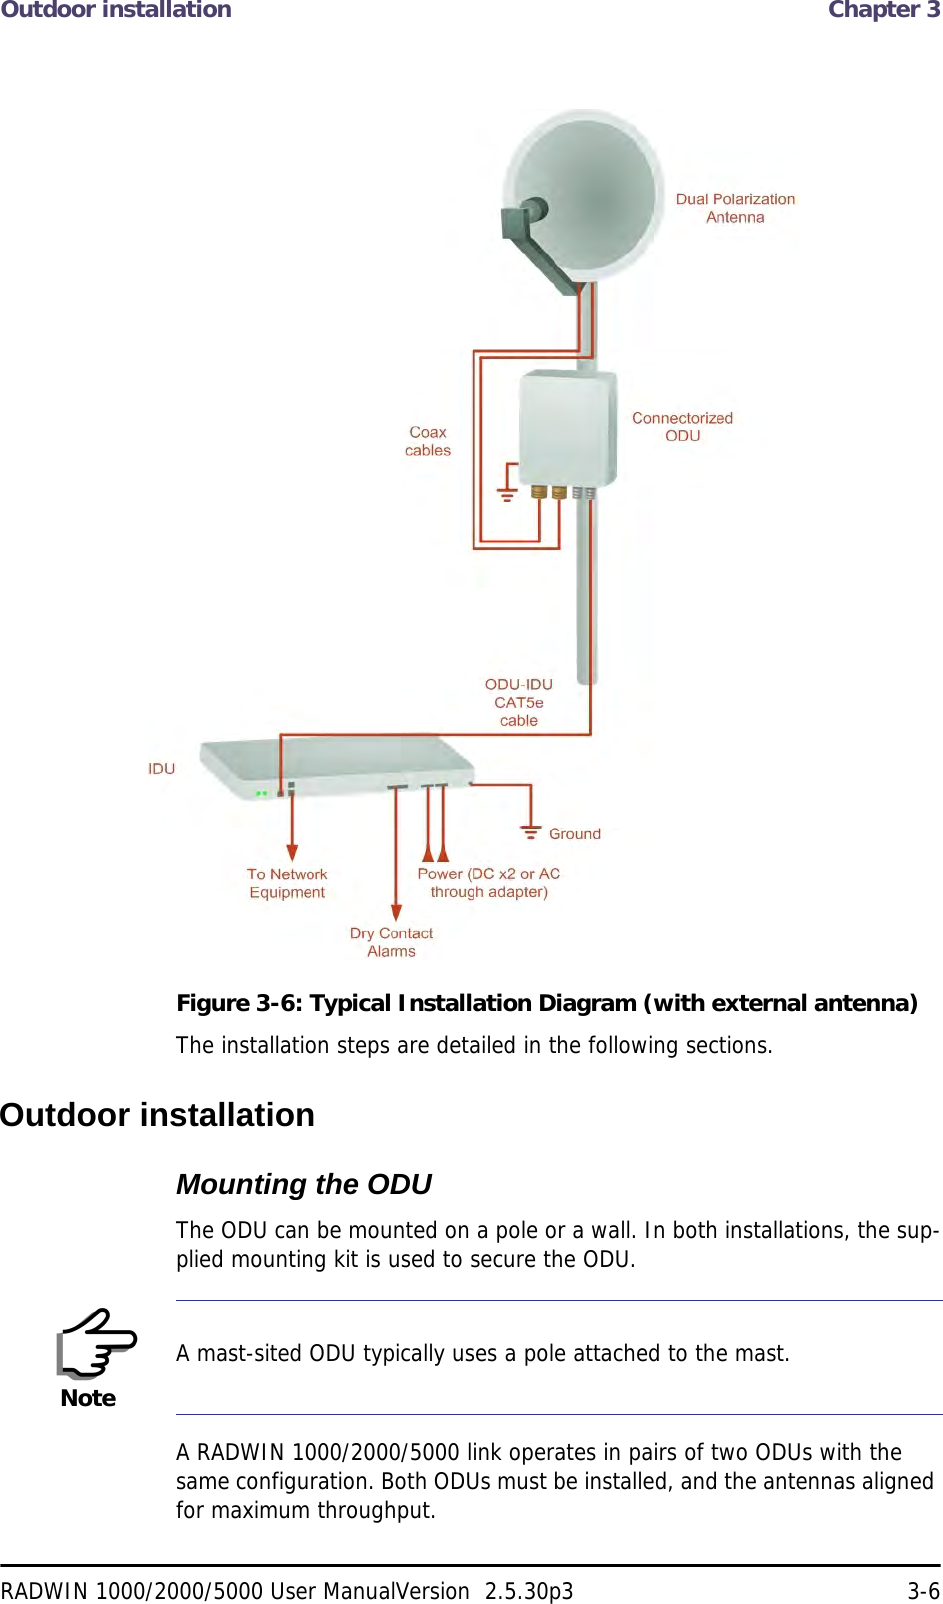 Outdoor installation  Chapter 3RADWIN 1000/2000/5000 User ManualVersion  2.5.30p3 3-6Figure 3-6: Typical Installation Diagram (with external antenna)The installation steps are detailed in the following sections.Outdoor installationMounting the ODUThe ODU can be mounted on a pole or a wall. In both installations, the sup-plied mounting kit is used to secure the ODU.A RADWIN 1000/2000/5000 link operates in pairs of two ODUs with the same configuration. Both ODUs must be installed, and the antennas aligned for maximum throughput.NoteA mast-sited ODU typically uses a pole attached to the mast.